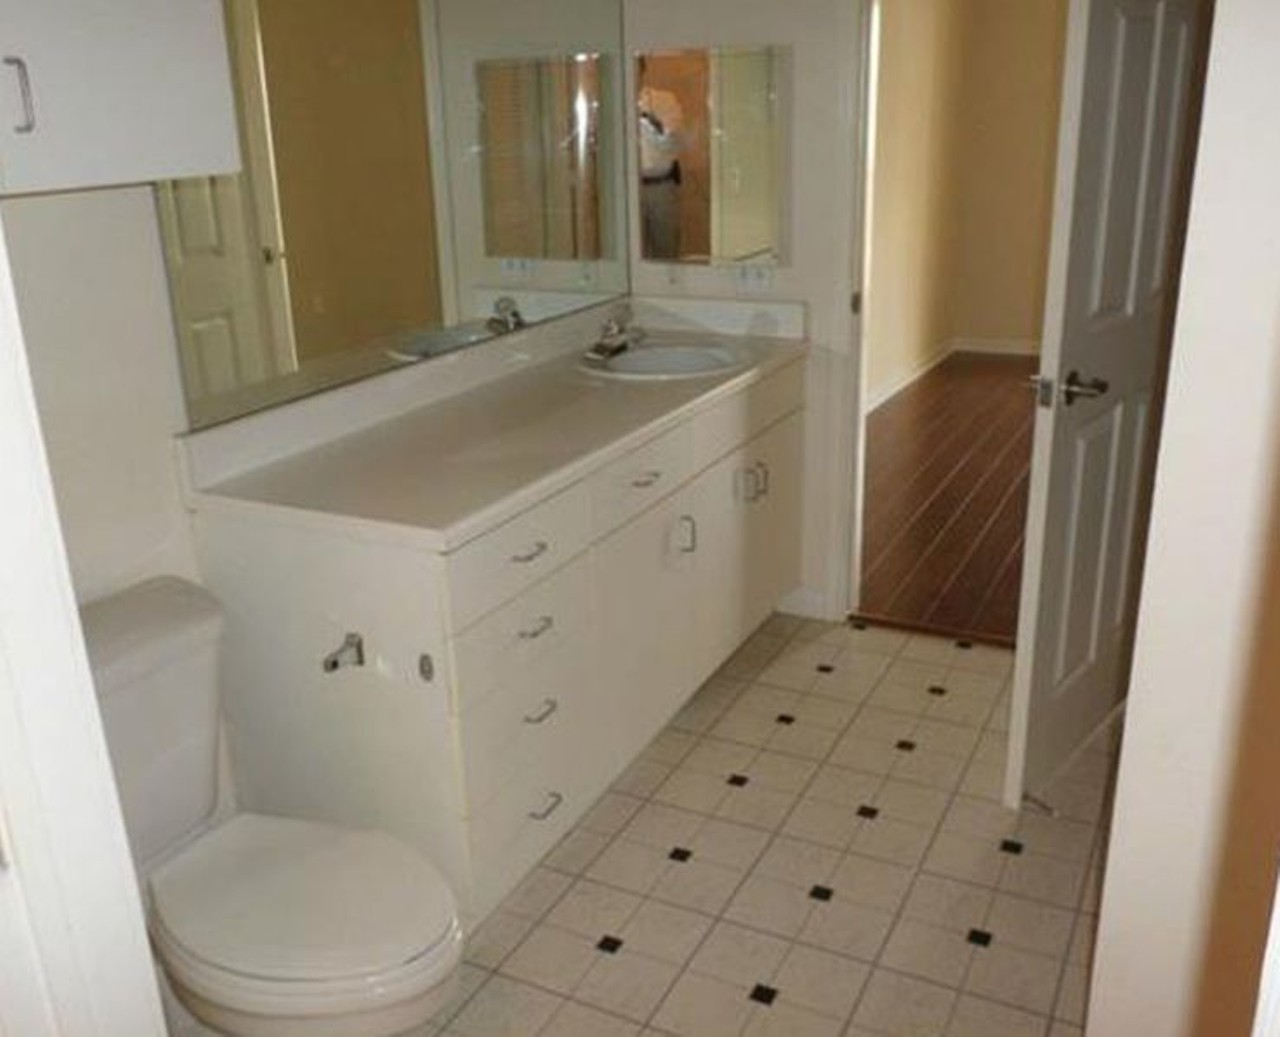 860 N Orange Ave, Orlando
$700/mo
1 bed, 1 bath, 700 sqft
This bathroom may be a little basic, but it is new and relatively spacious.